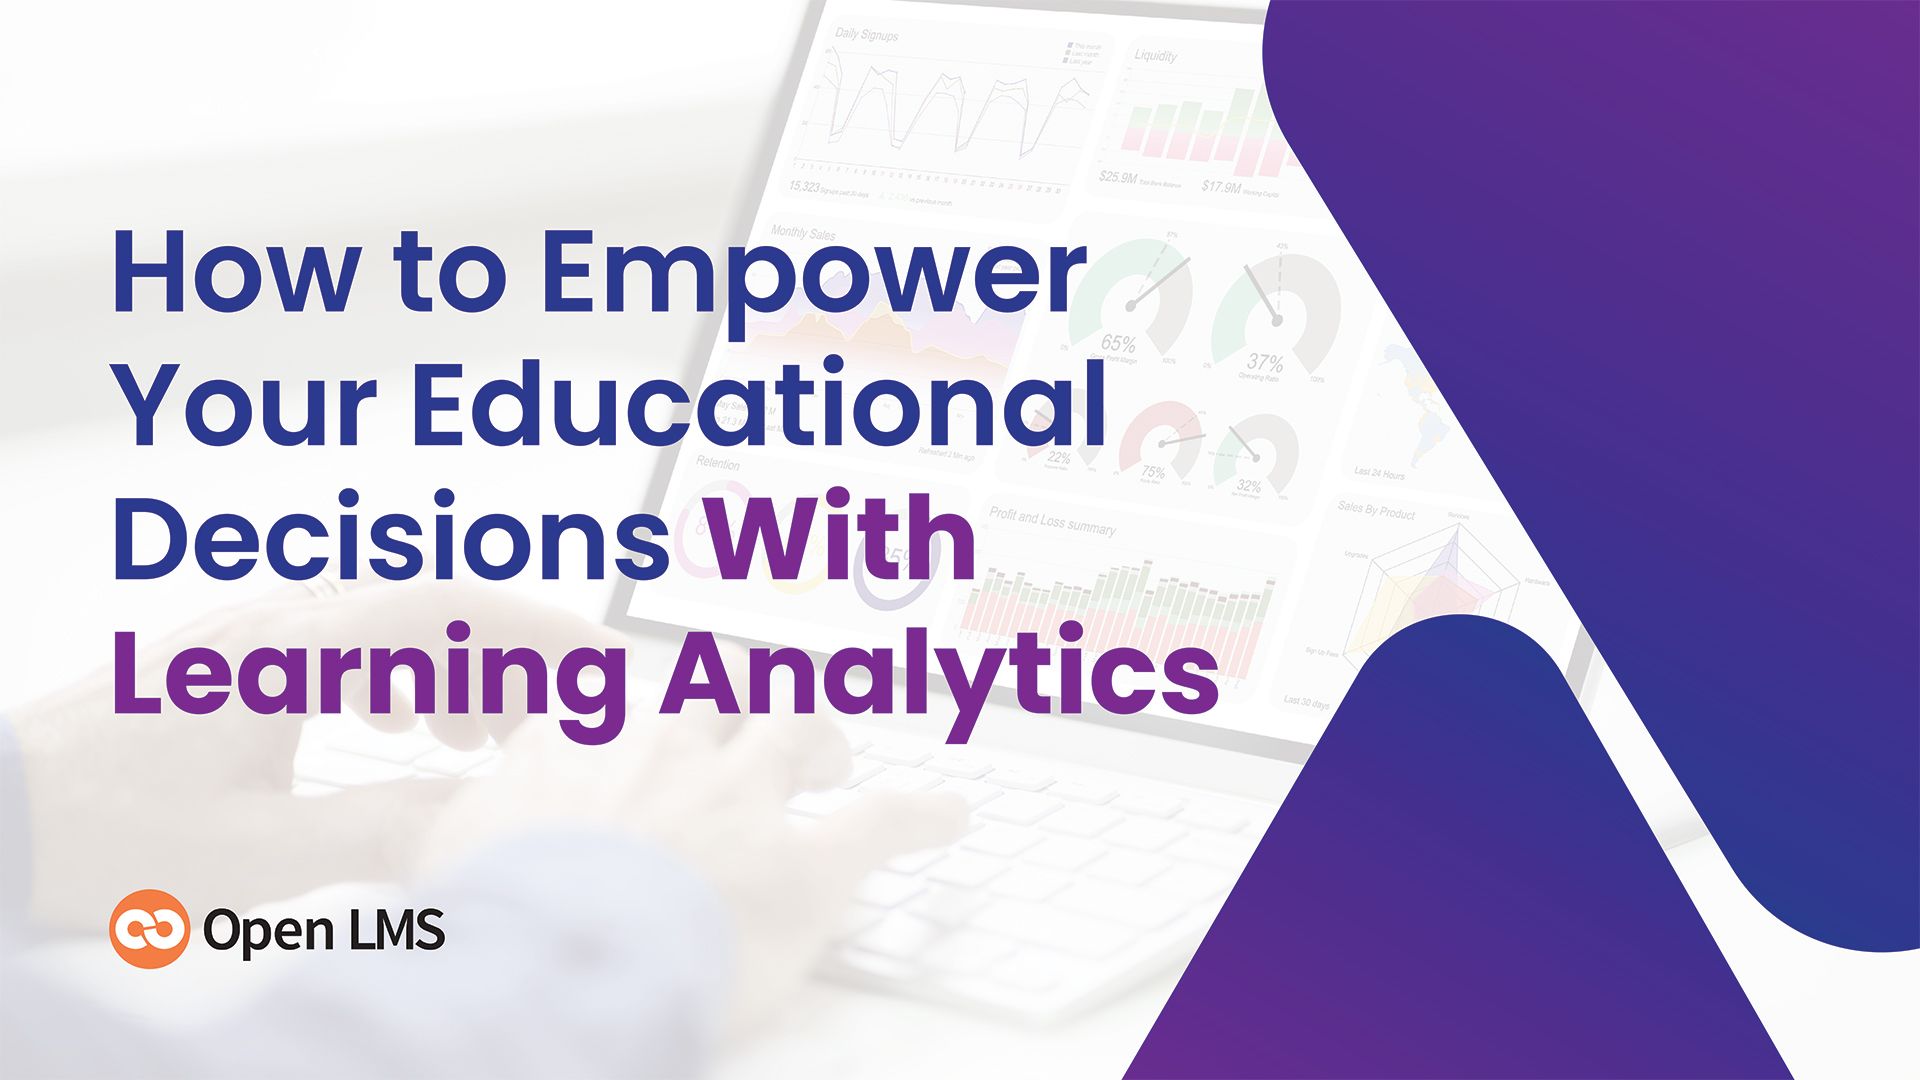 How to Empower Your Educational Decisions With Learning Analytics